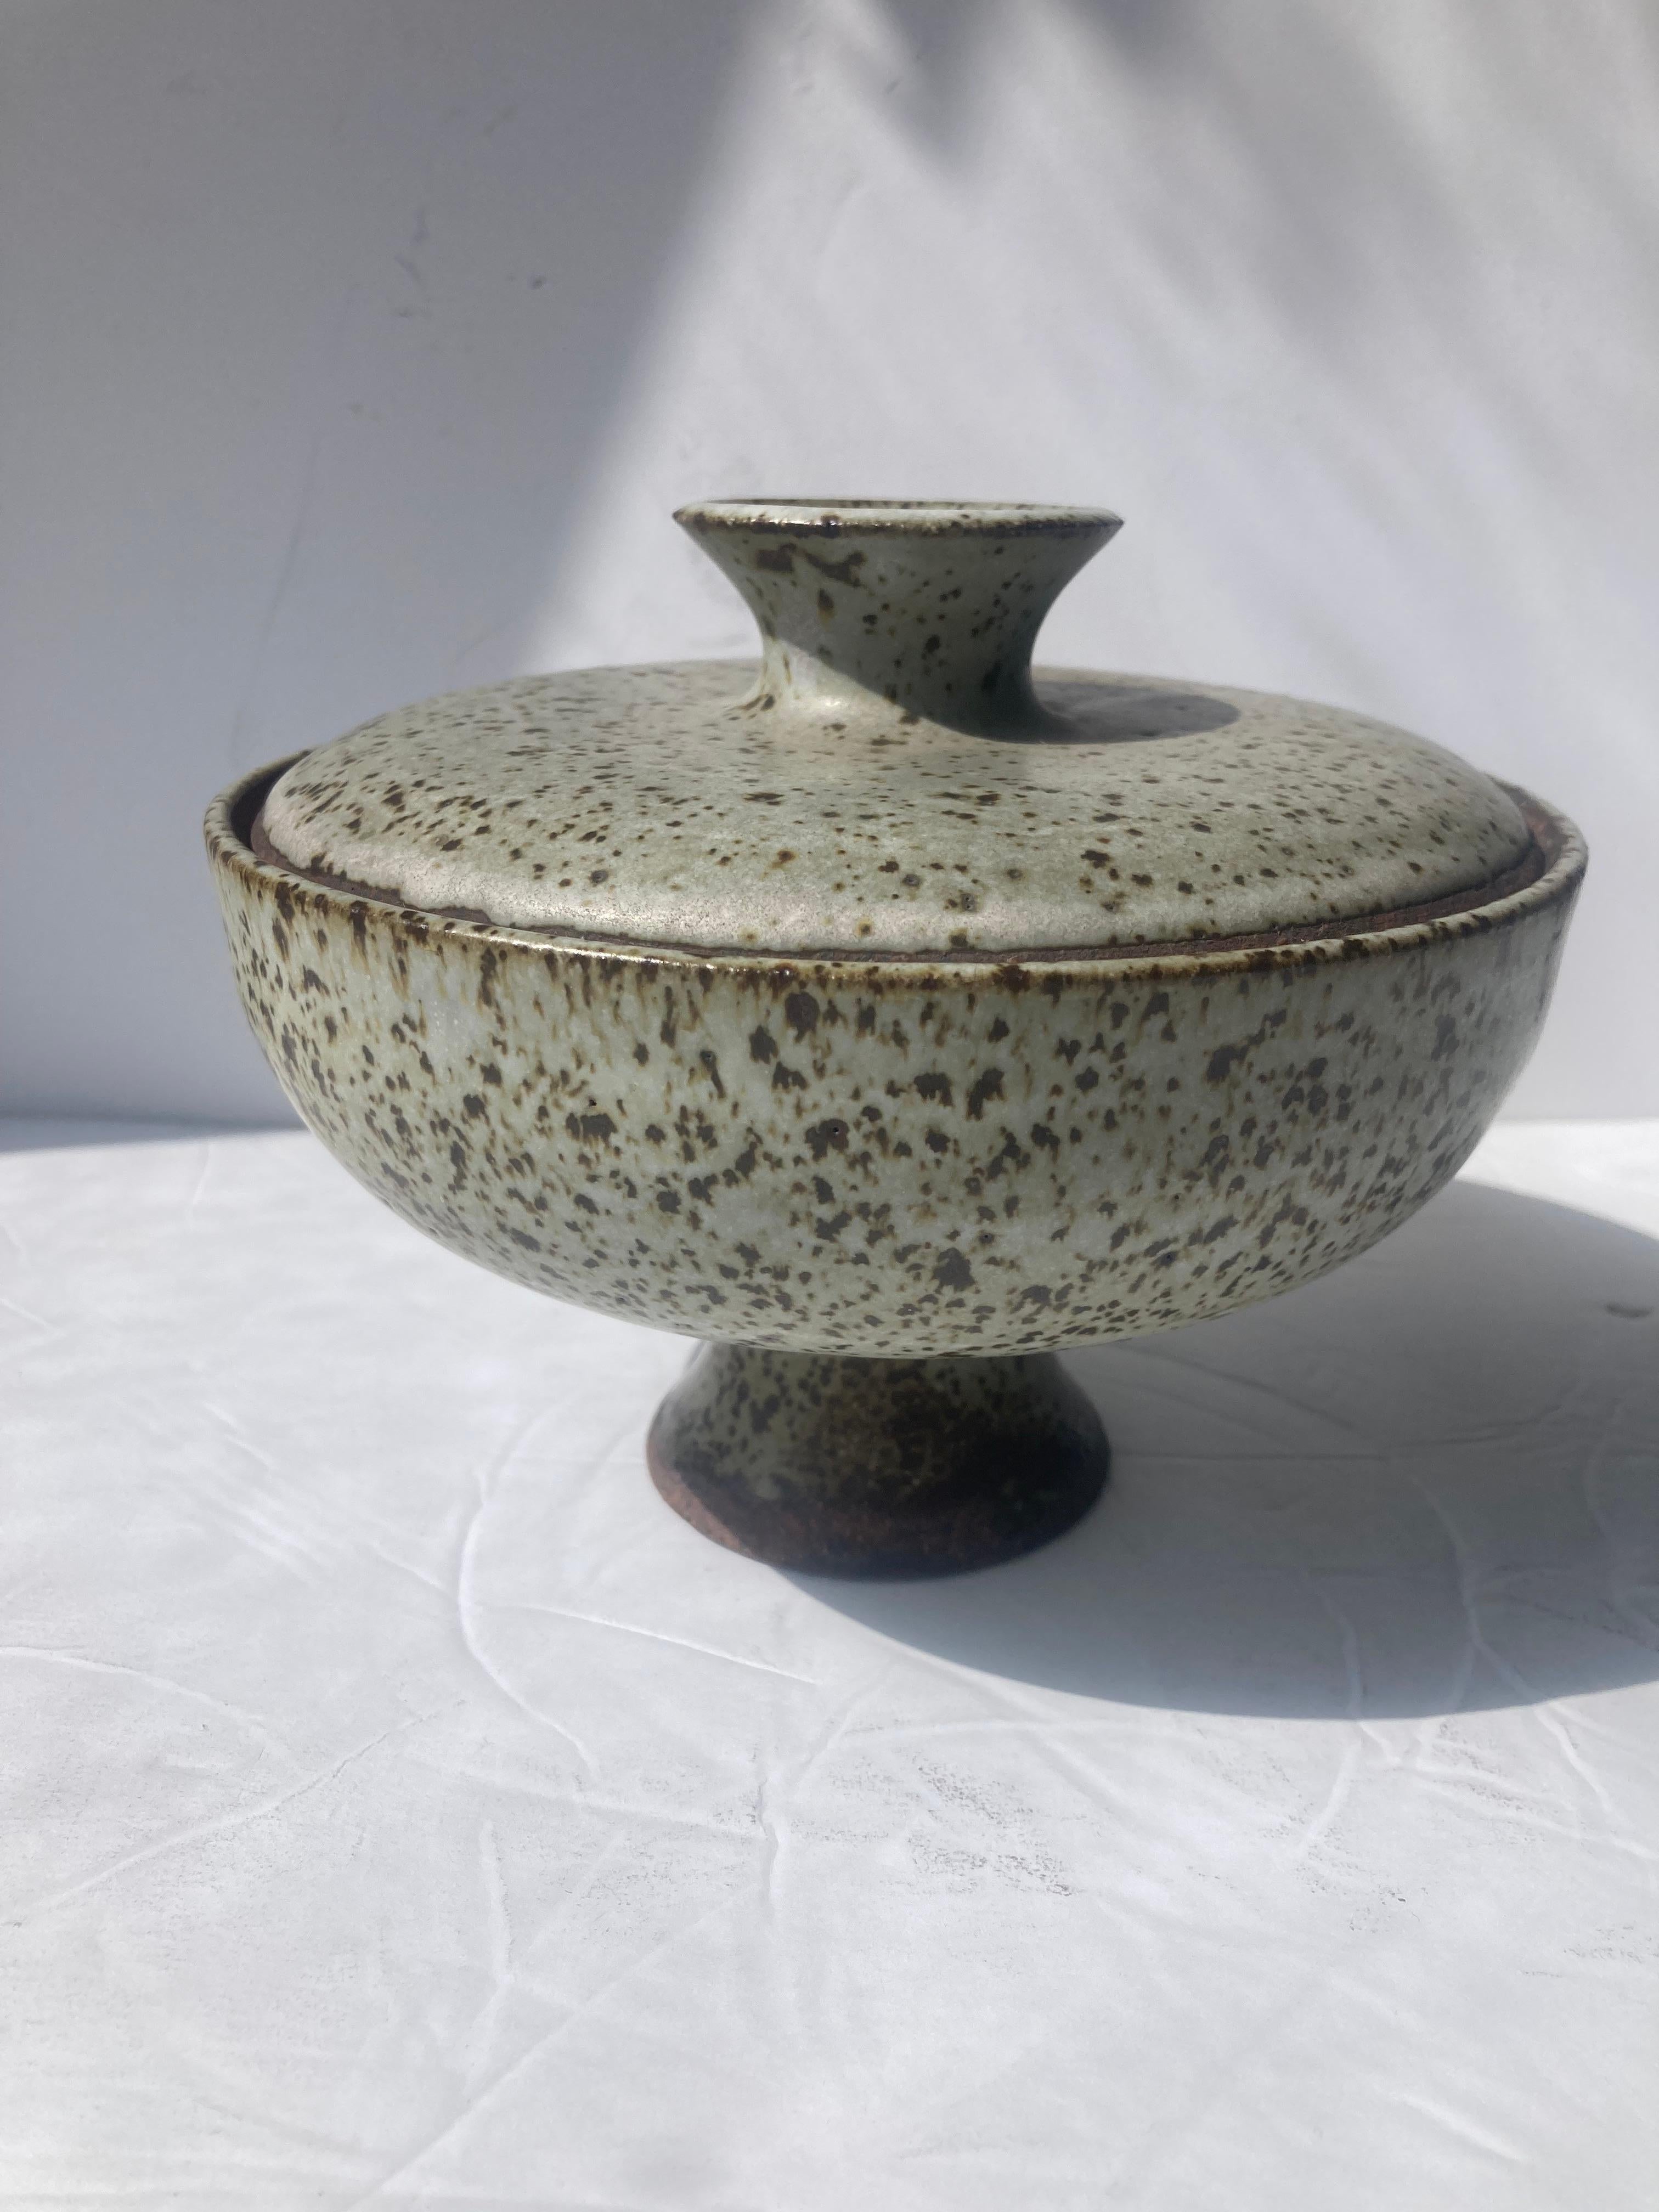 Beautiful bowl with lid by the well known potter Joel Edwards, studied with Soji Hamada, Peter Voulkos among other famous artists.